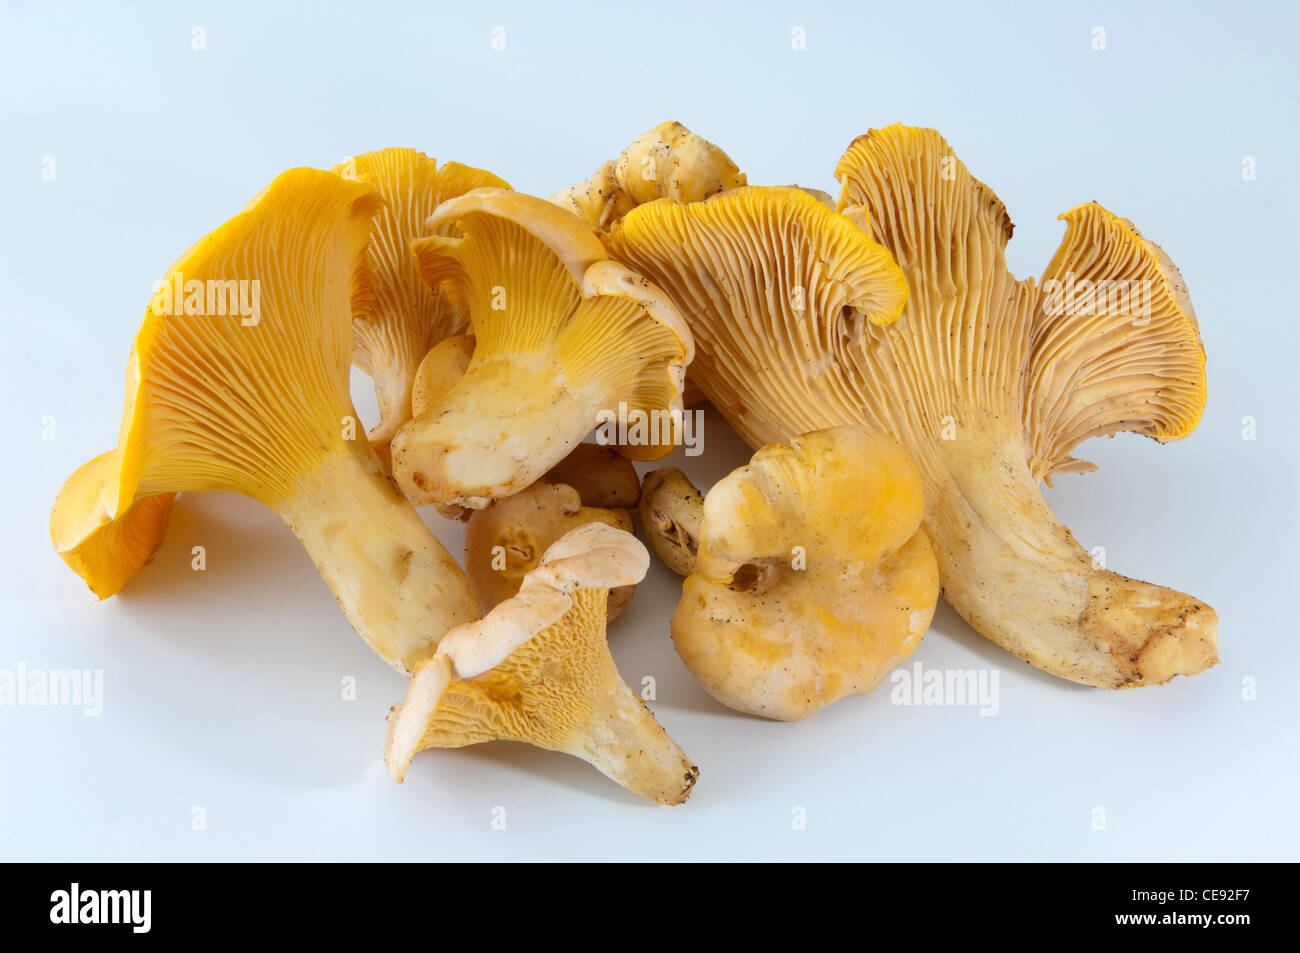 Yellow Chanterelle (Cantharellus cibarius). Several mushrooms. Studio picture against a white background. Stock Photo